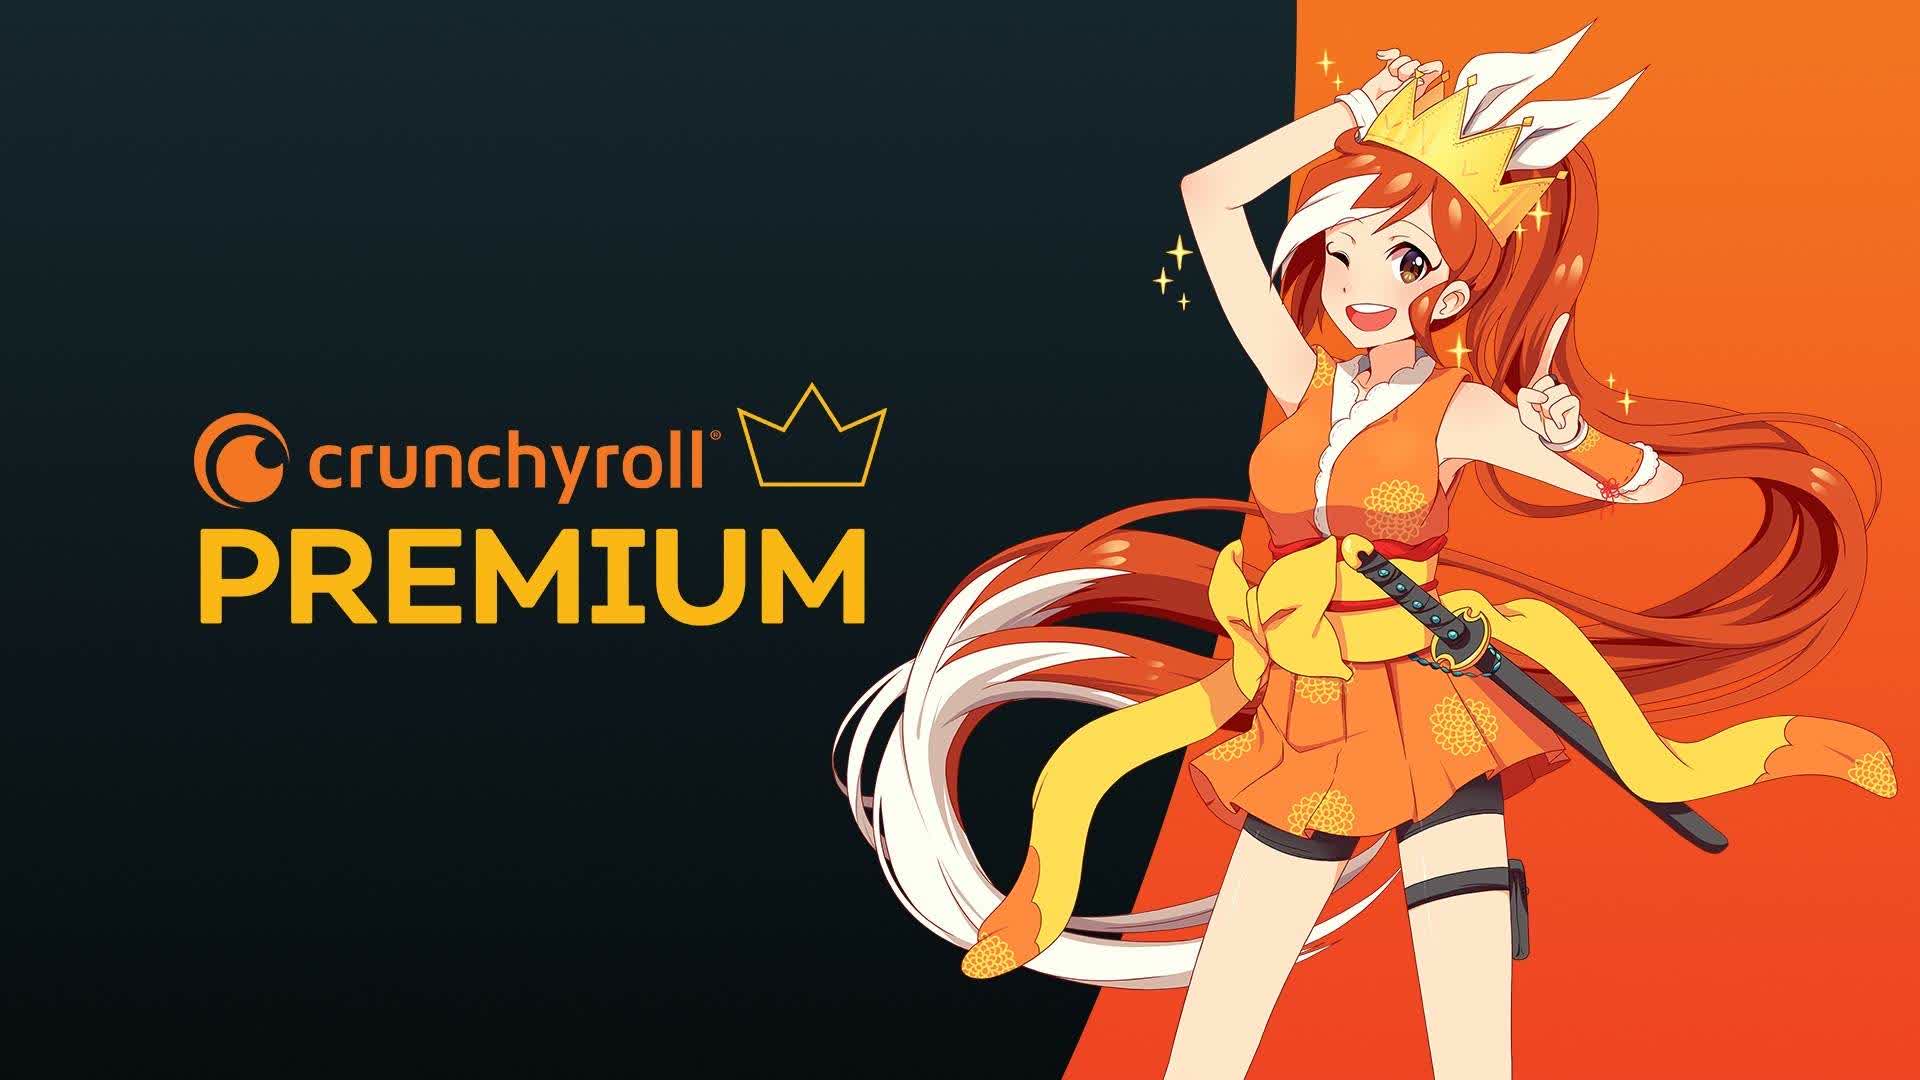 Xbox is giving away 75 days of Crunchyroll Premium to Game Pass Ultimate subscribers